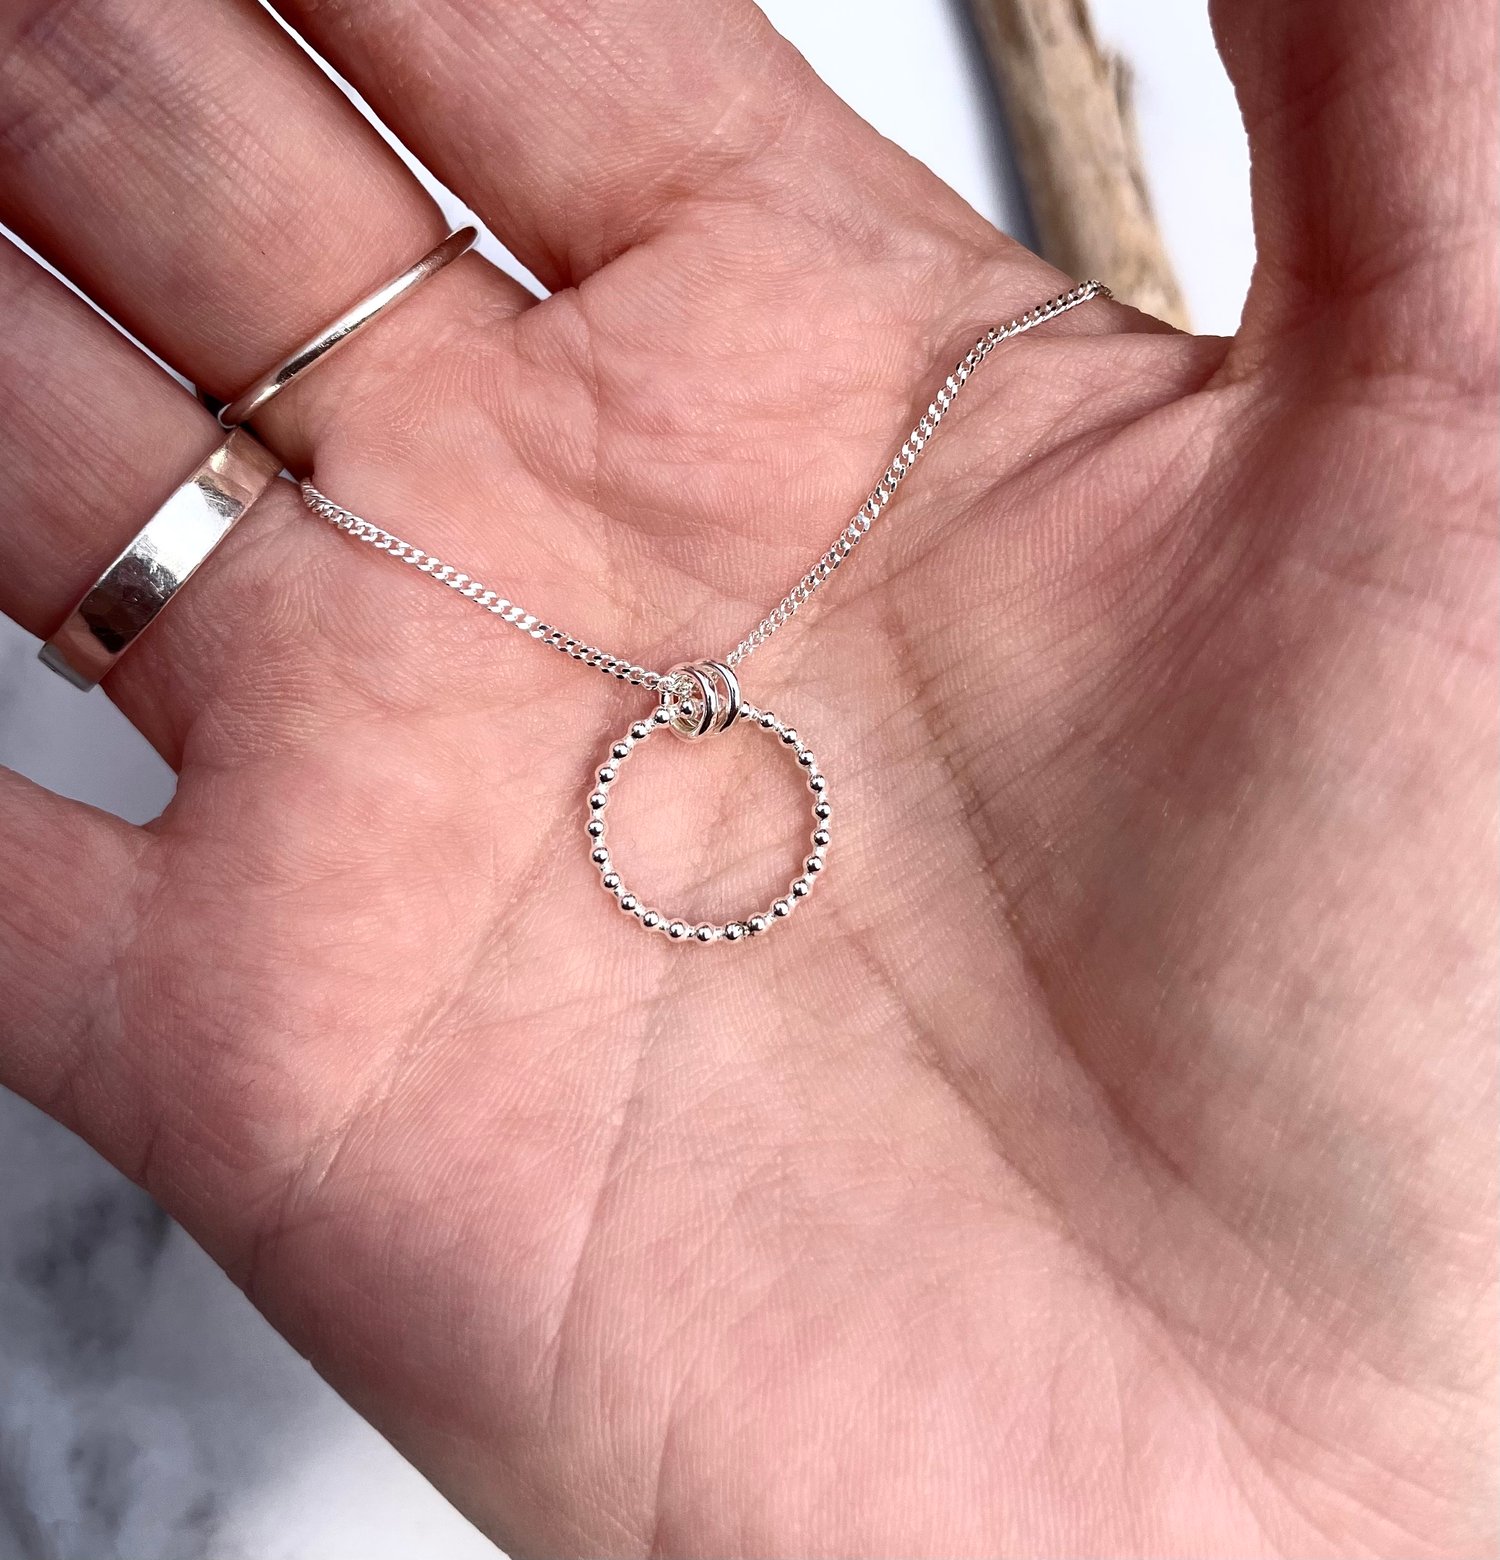 Image of Handmade Sterling Silver Enzo Circle Pendant 